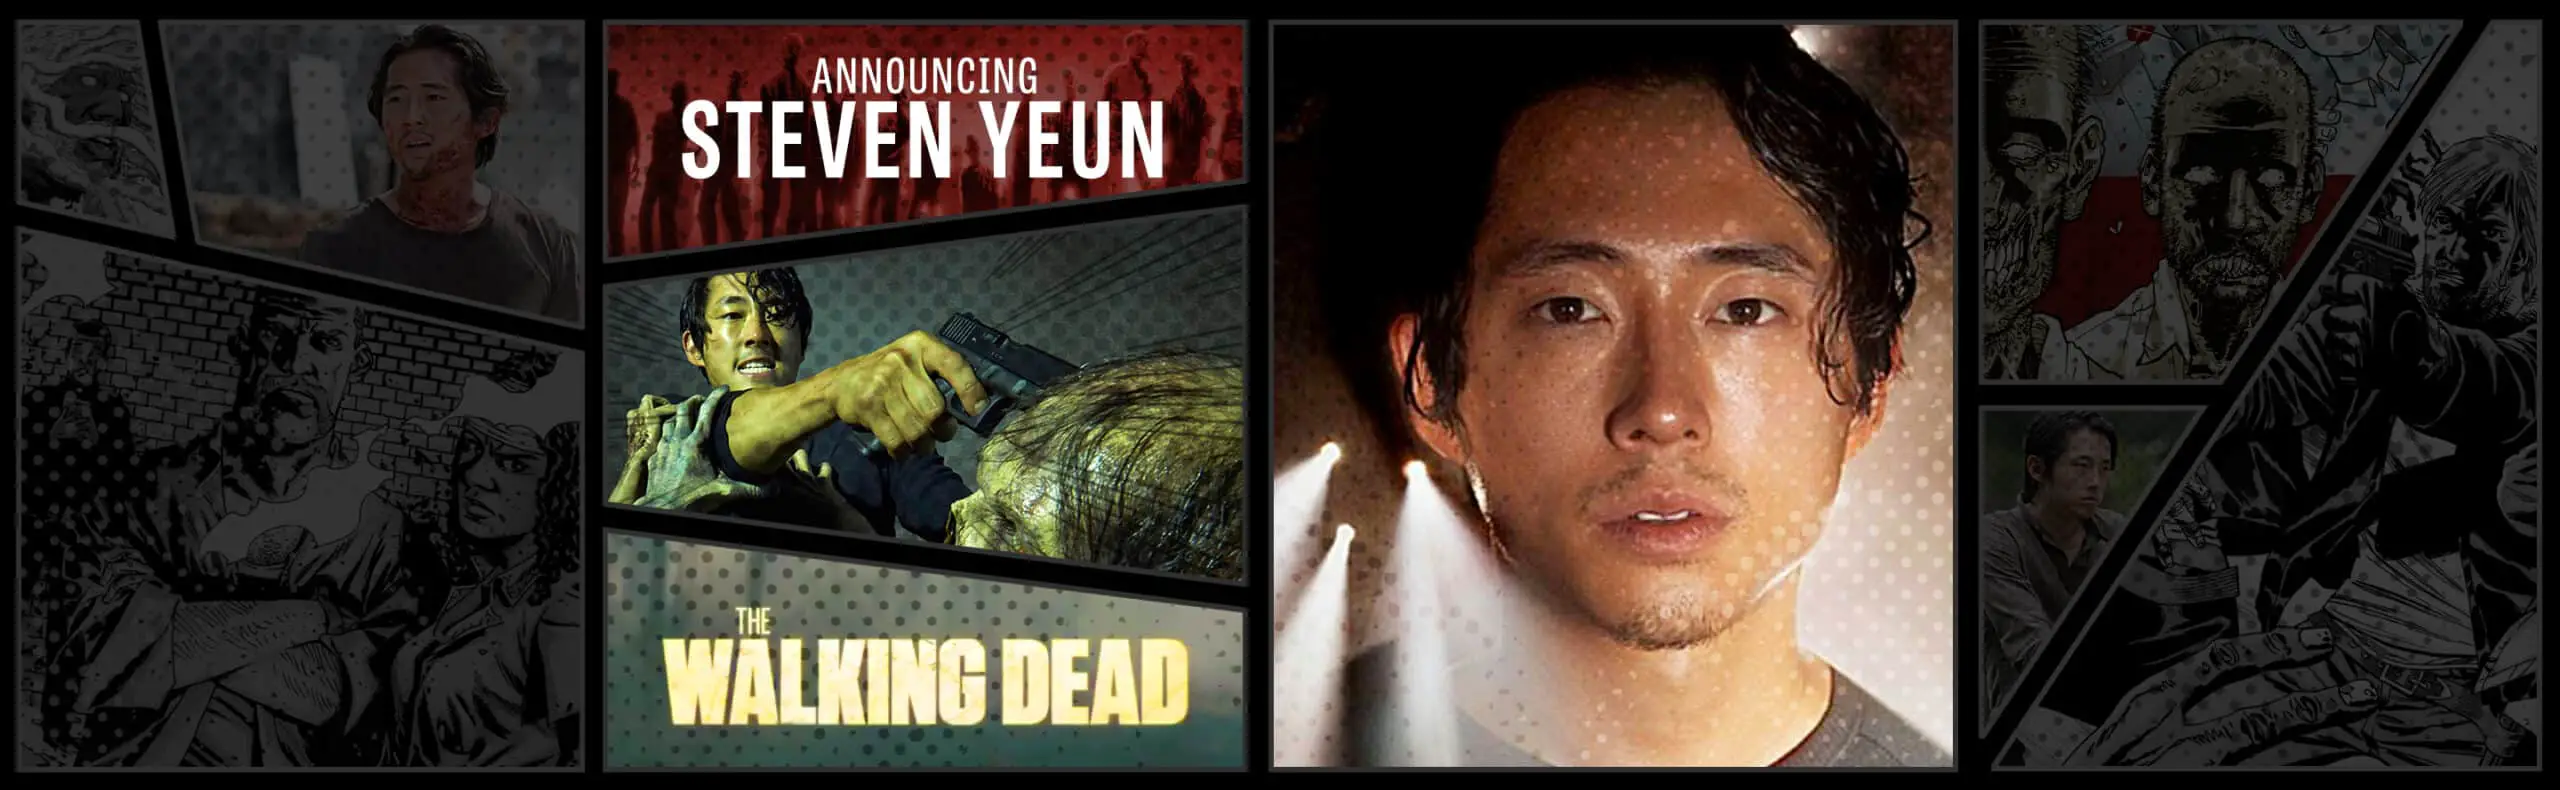 The Walking Dead’s Steven Yeun is SVCC-Bound